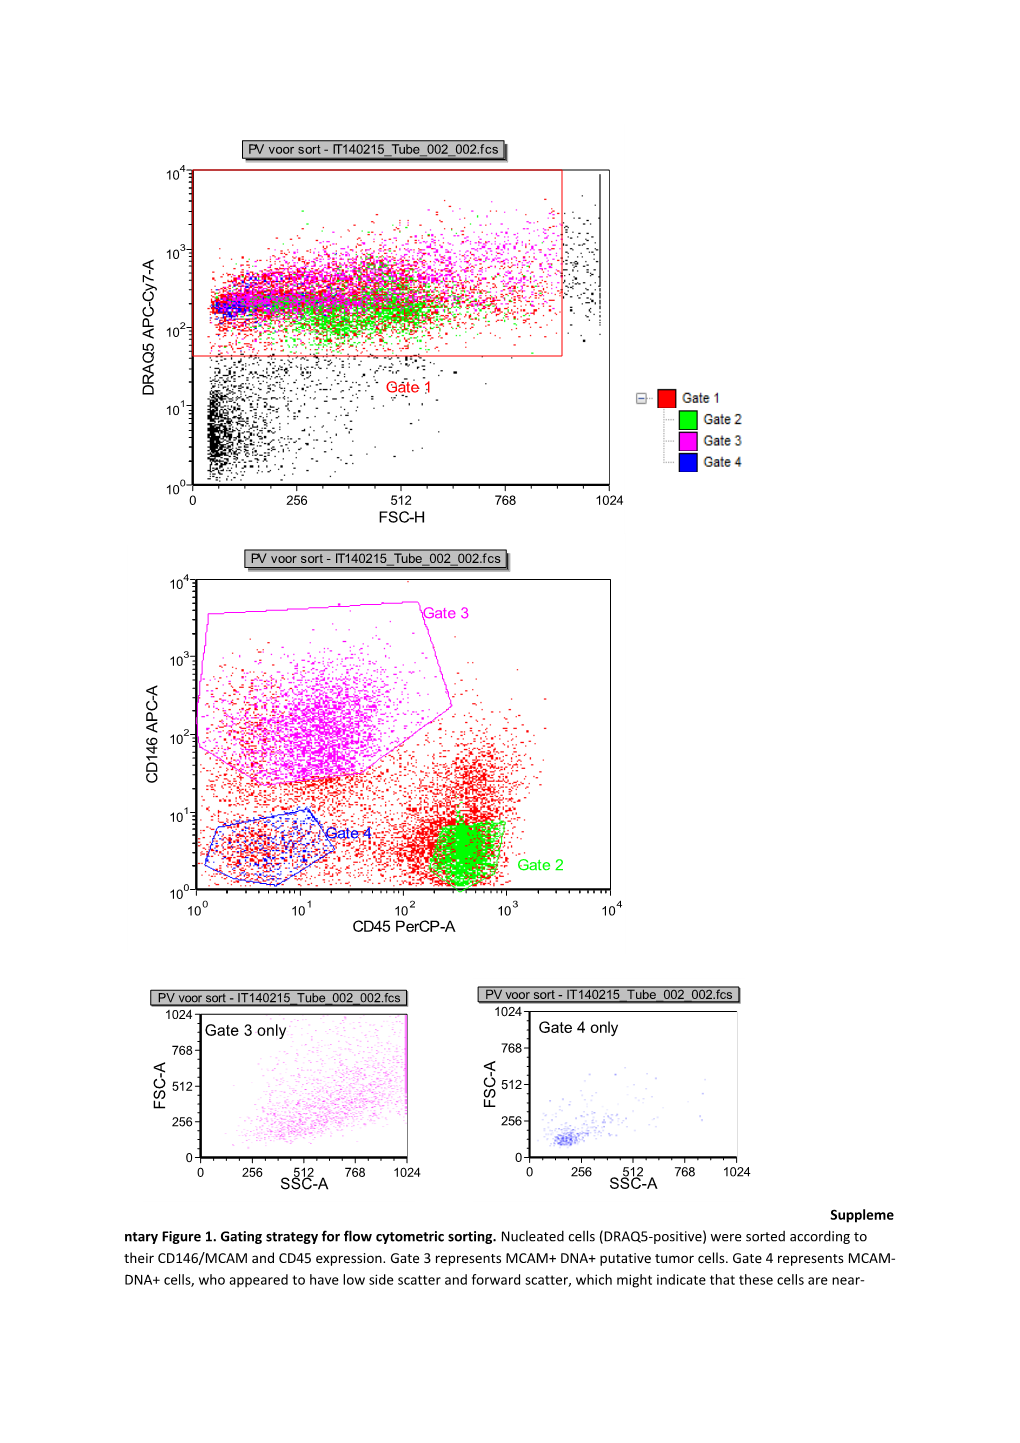 Supplementary Figure 1. Gating Strategy for Flow Cytometric Sorting. Nucleated Cells